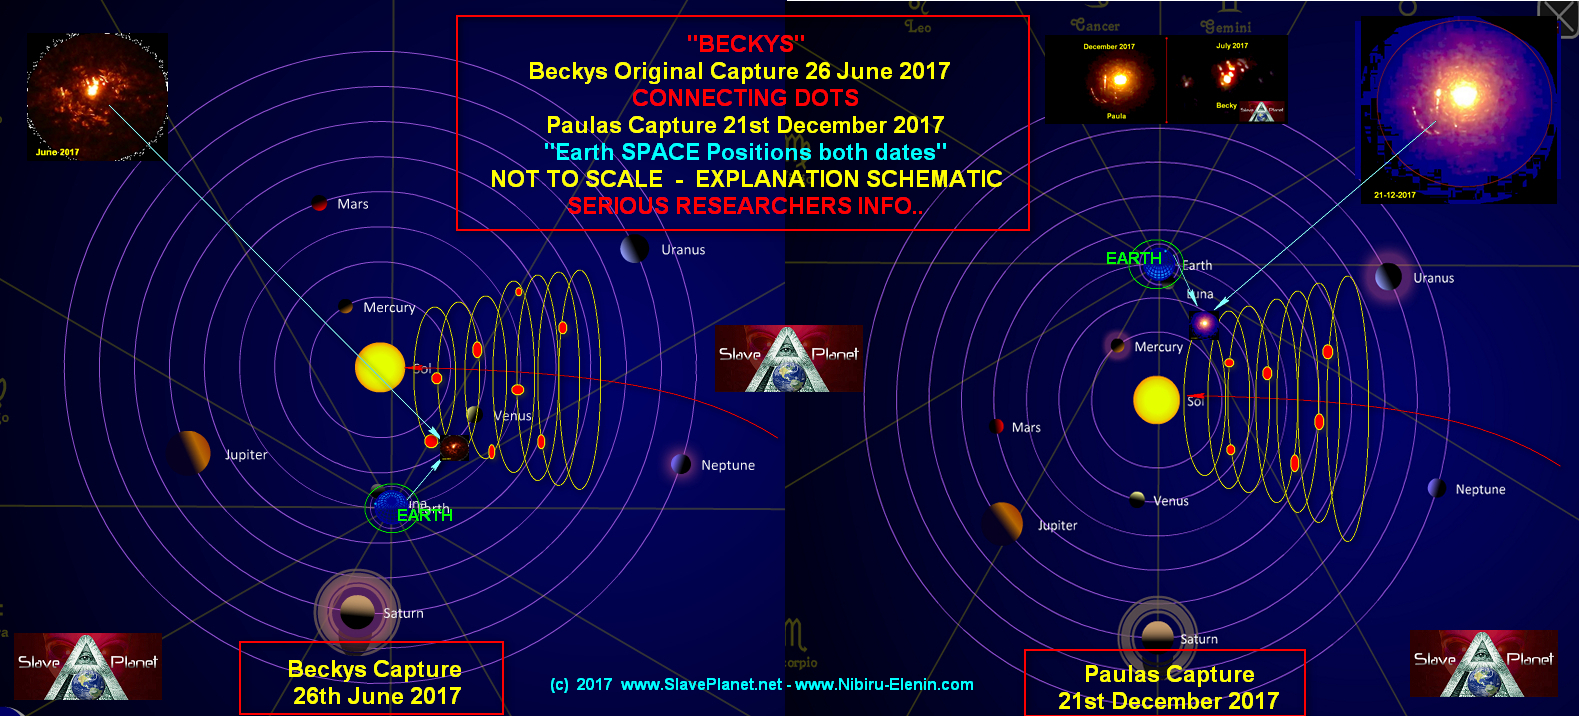 FULL Planet X System BECKYS 4th Capture INVESTIGATED Dec 2017